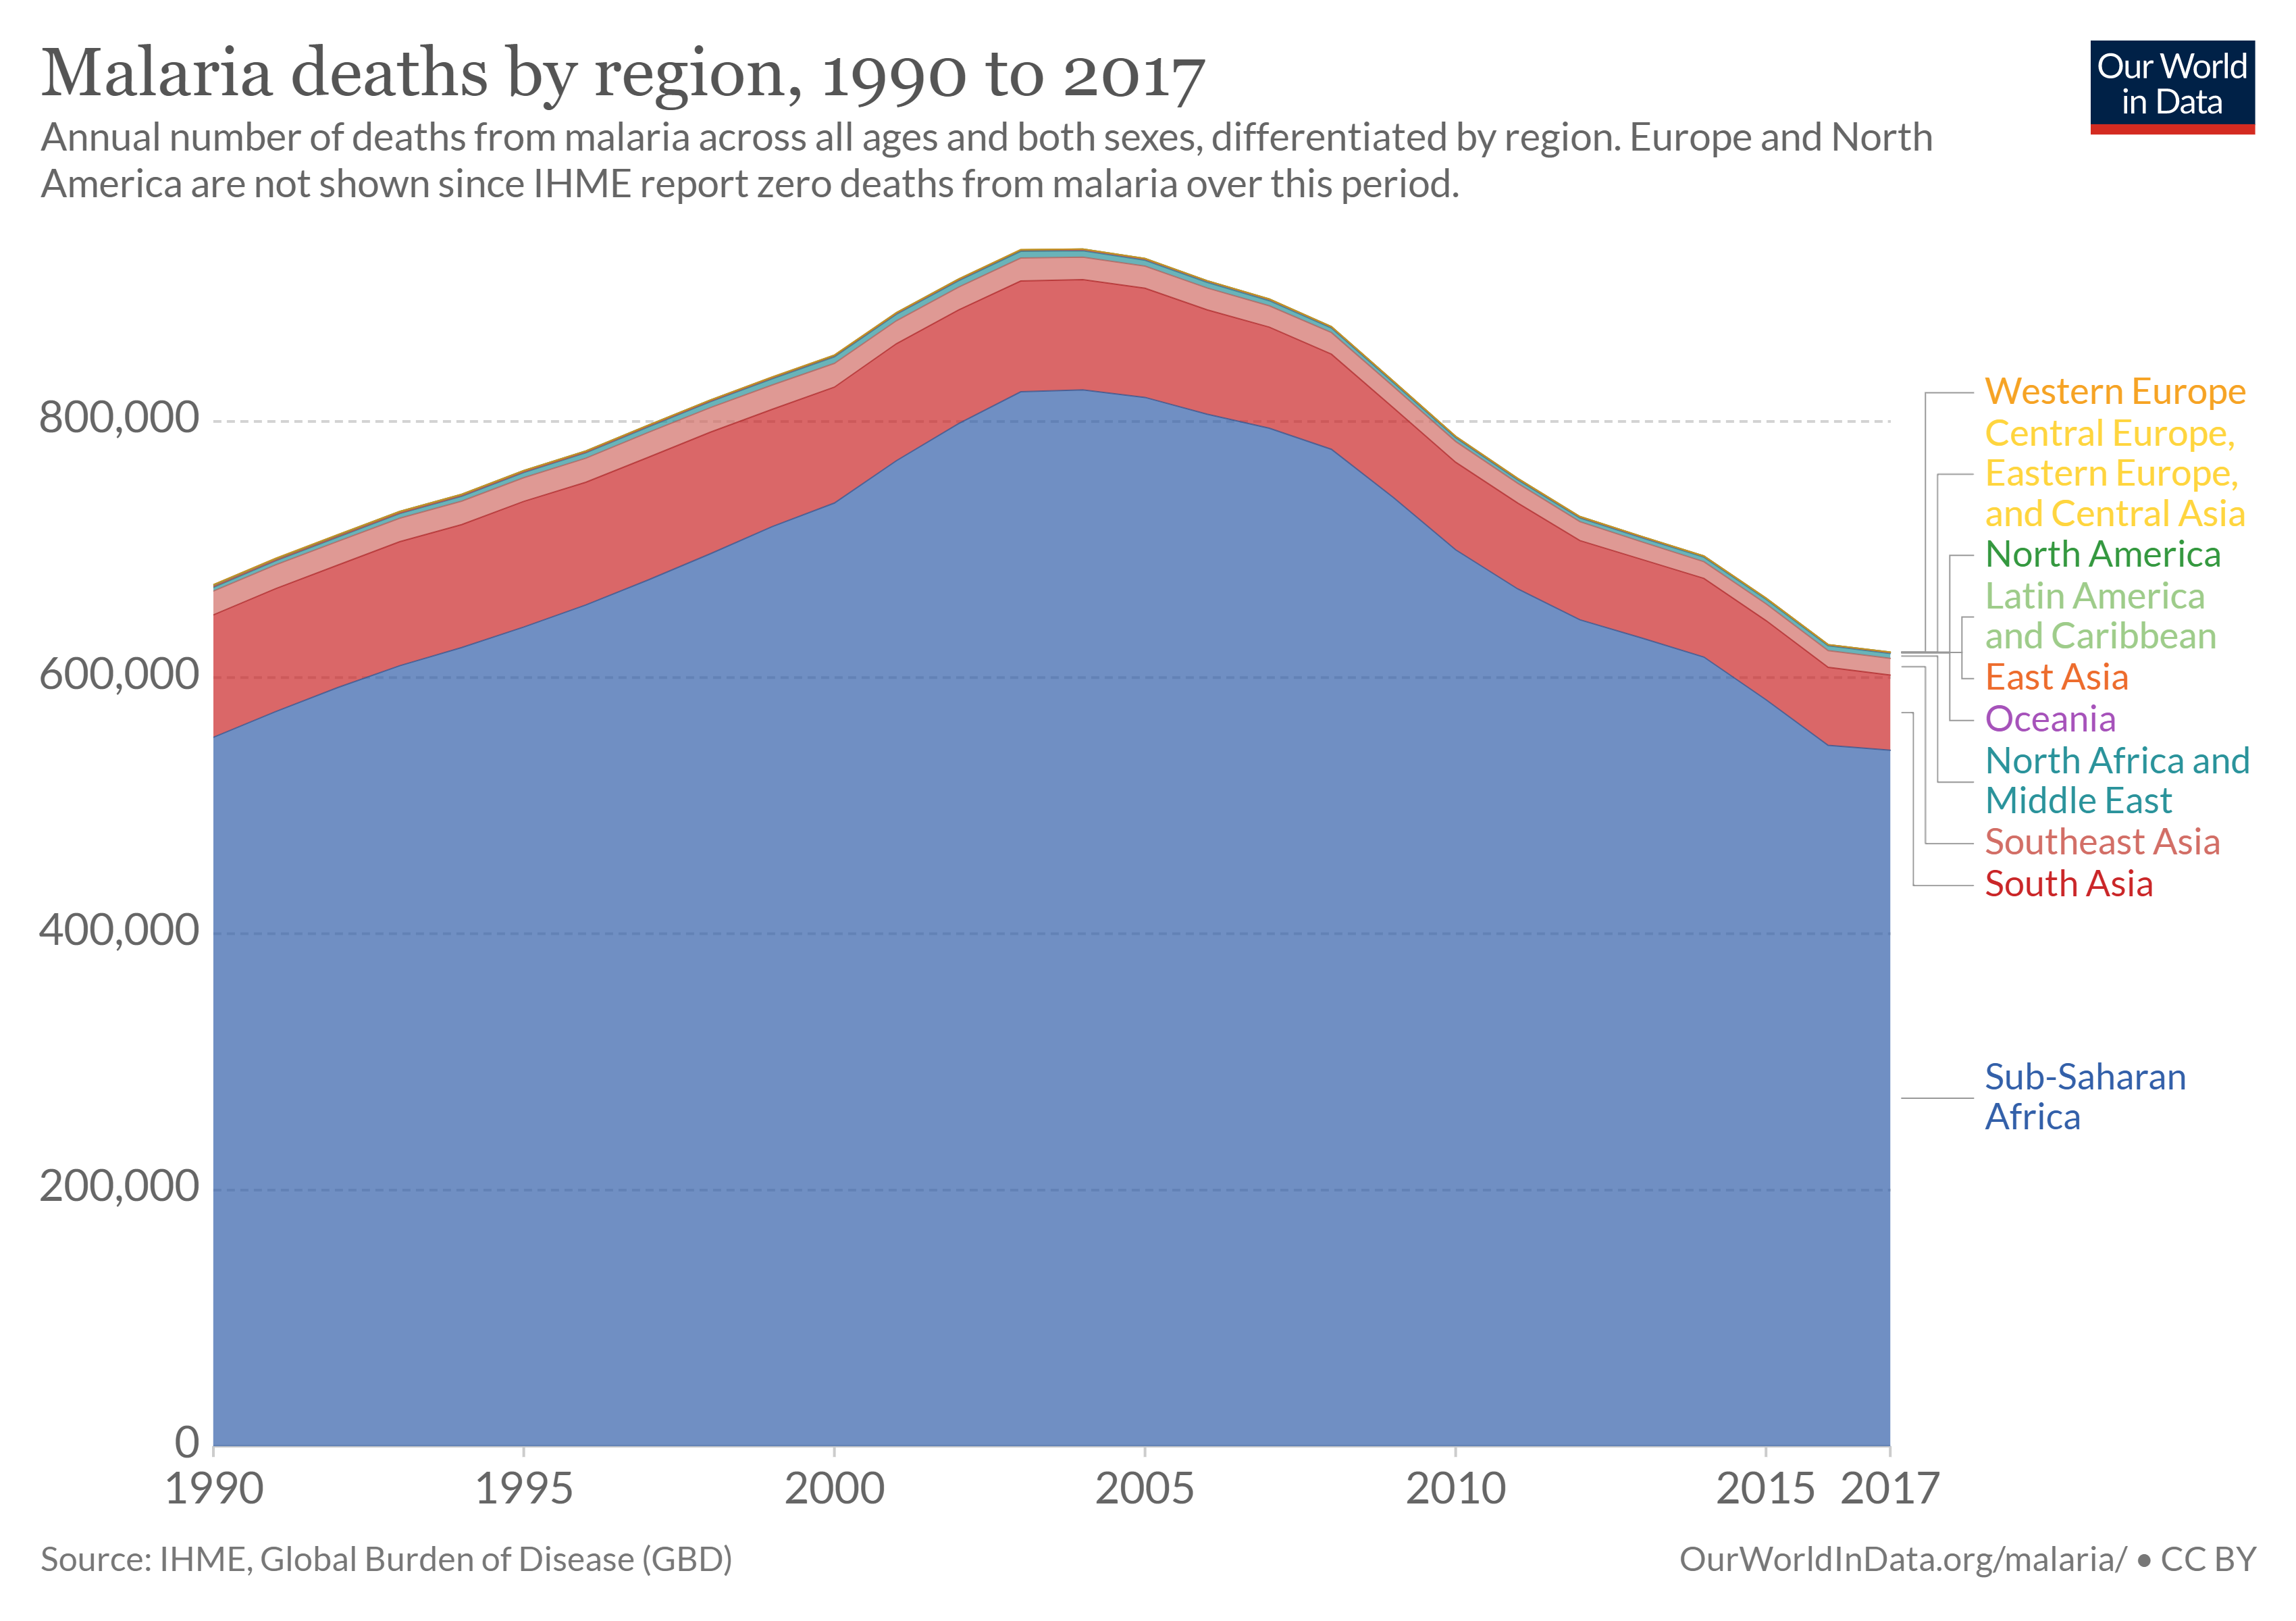 Graph of malarial deaths by country over time. Most of the graph is shaded blue, indicating the most deaths in Sub-Saharan Africa.